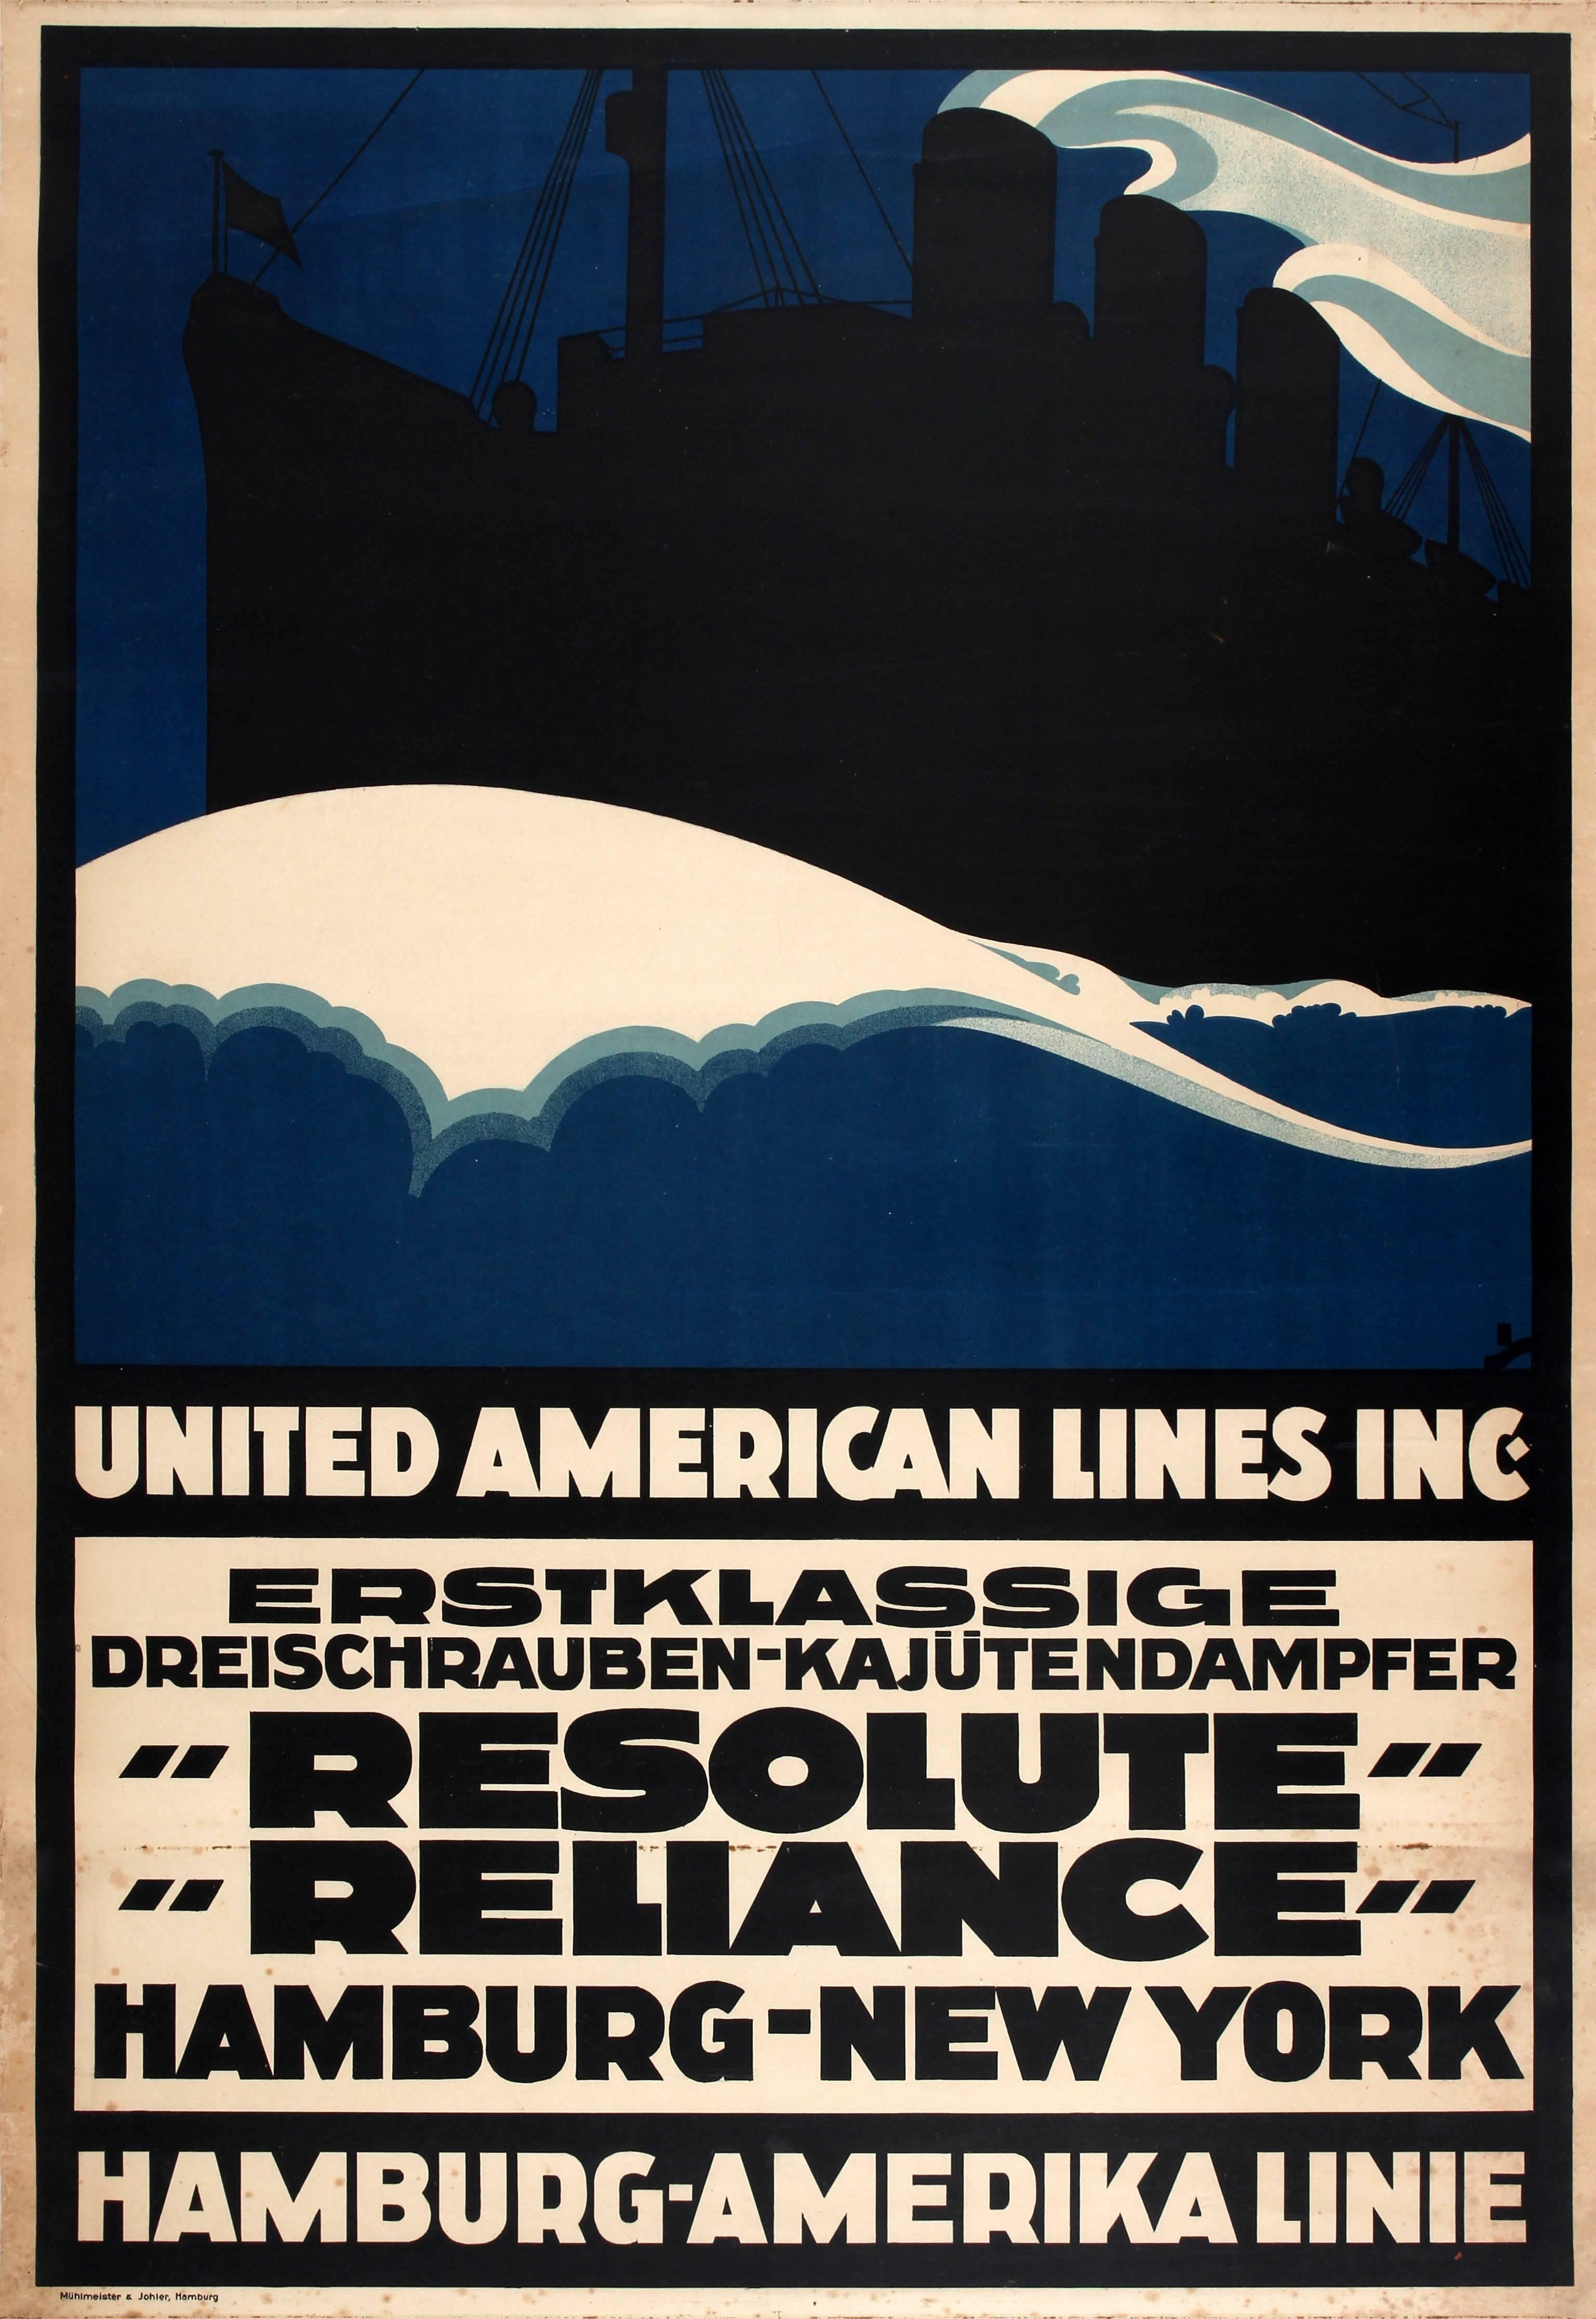 Unknown Print - Original Cruise Ship Travel Poster For Hamburg-New York By "Resolute" "Reliance"